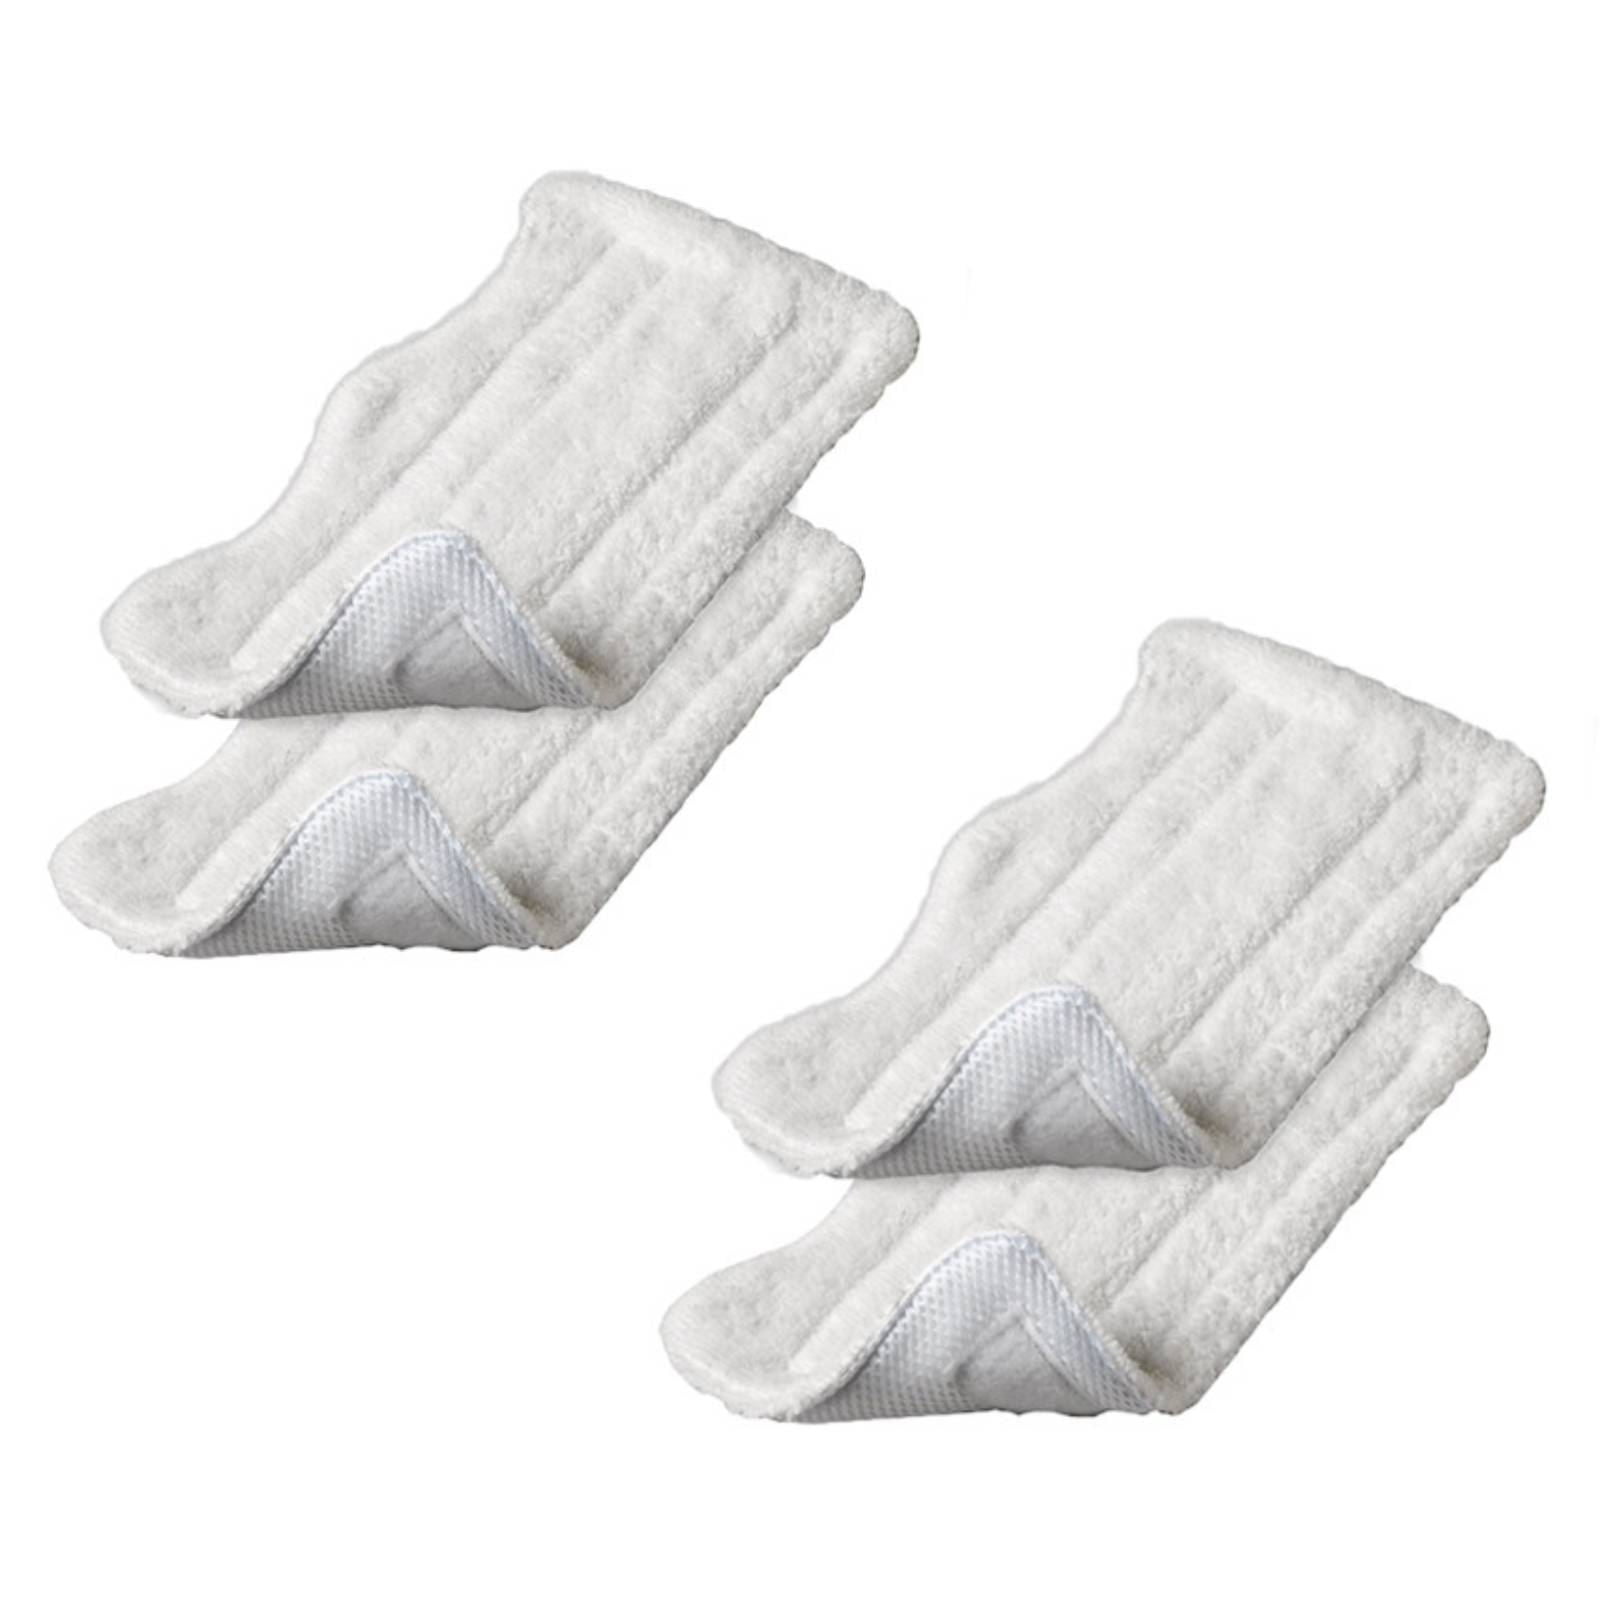 Fushing 10Pcs Cleaning Pads for Shark Steam Mop S3101 S3202 S3250 S3251 